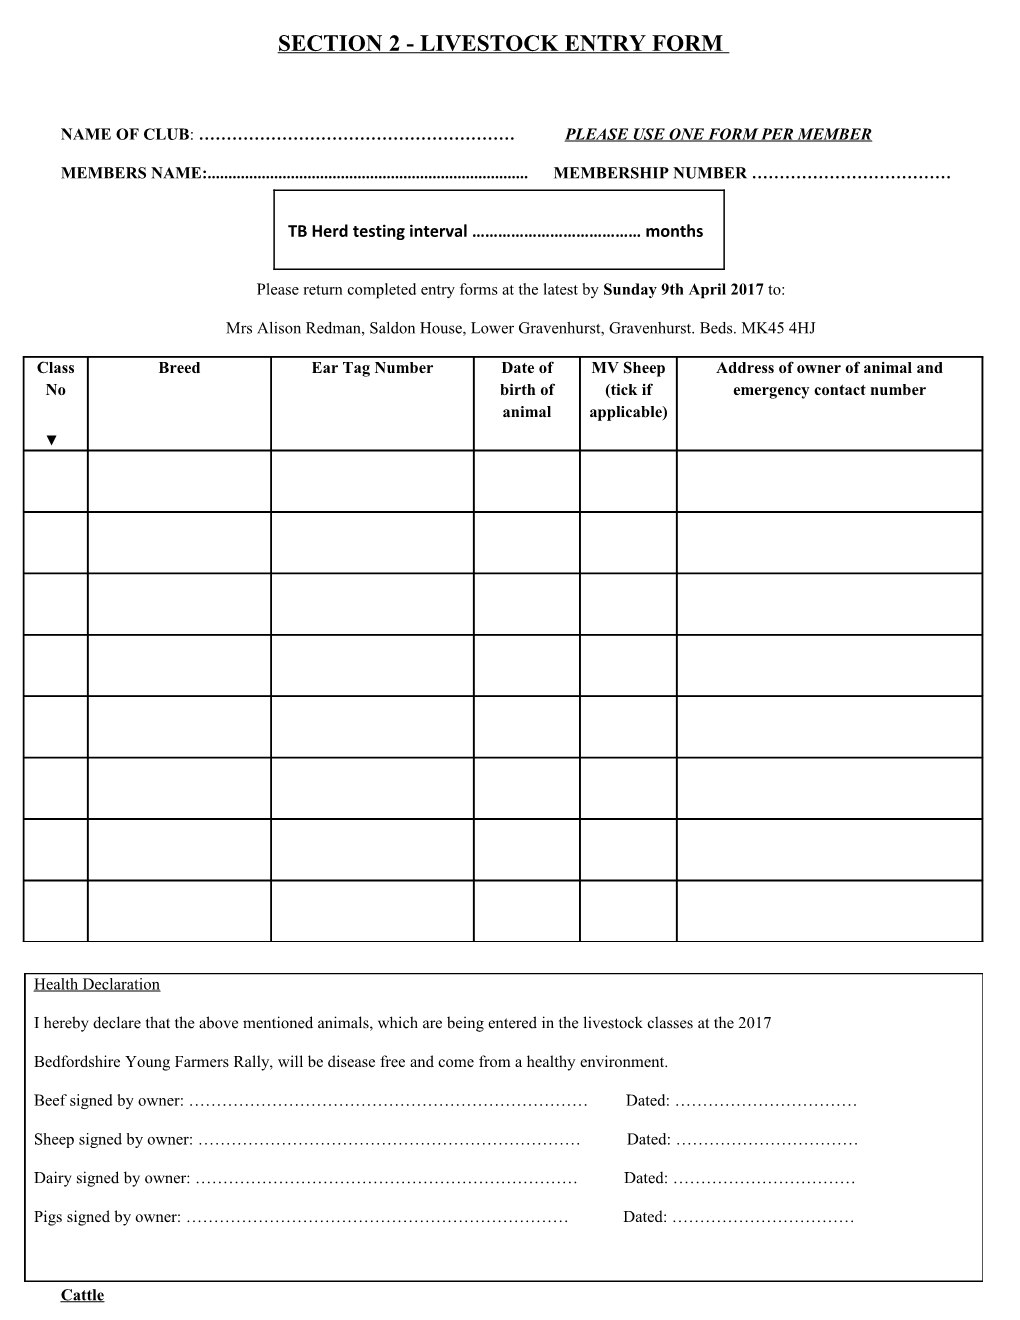 Section 3-Livestock Entry Form